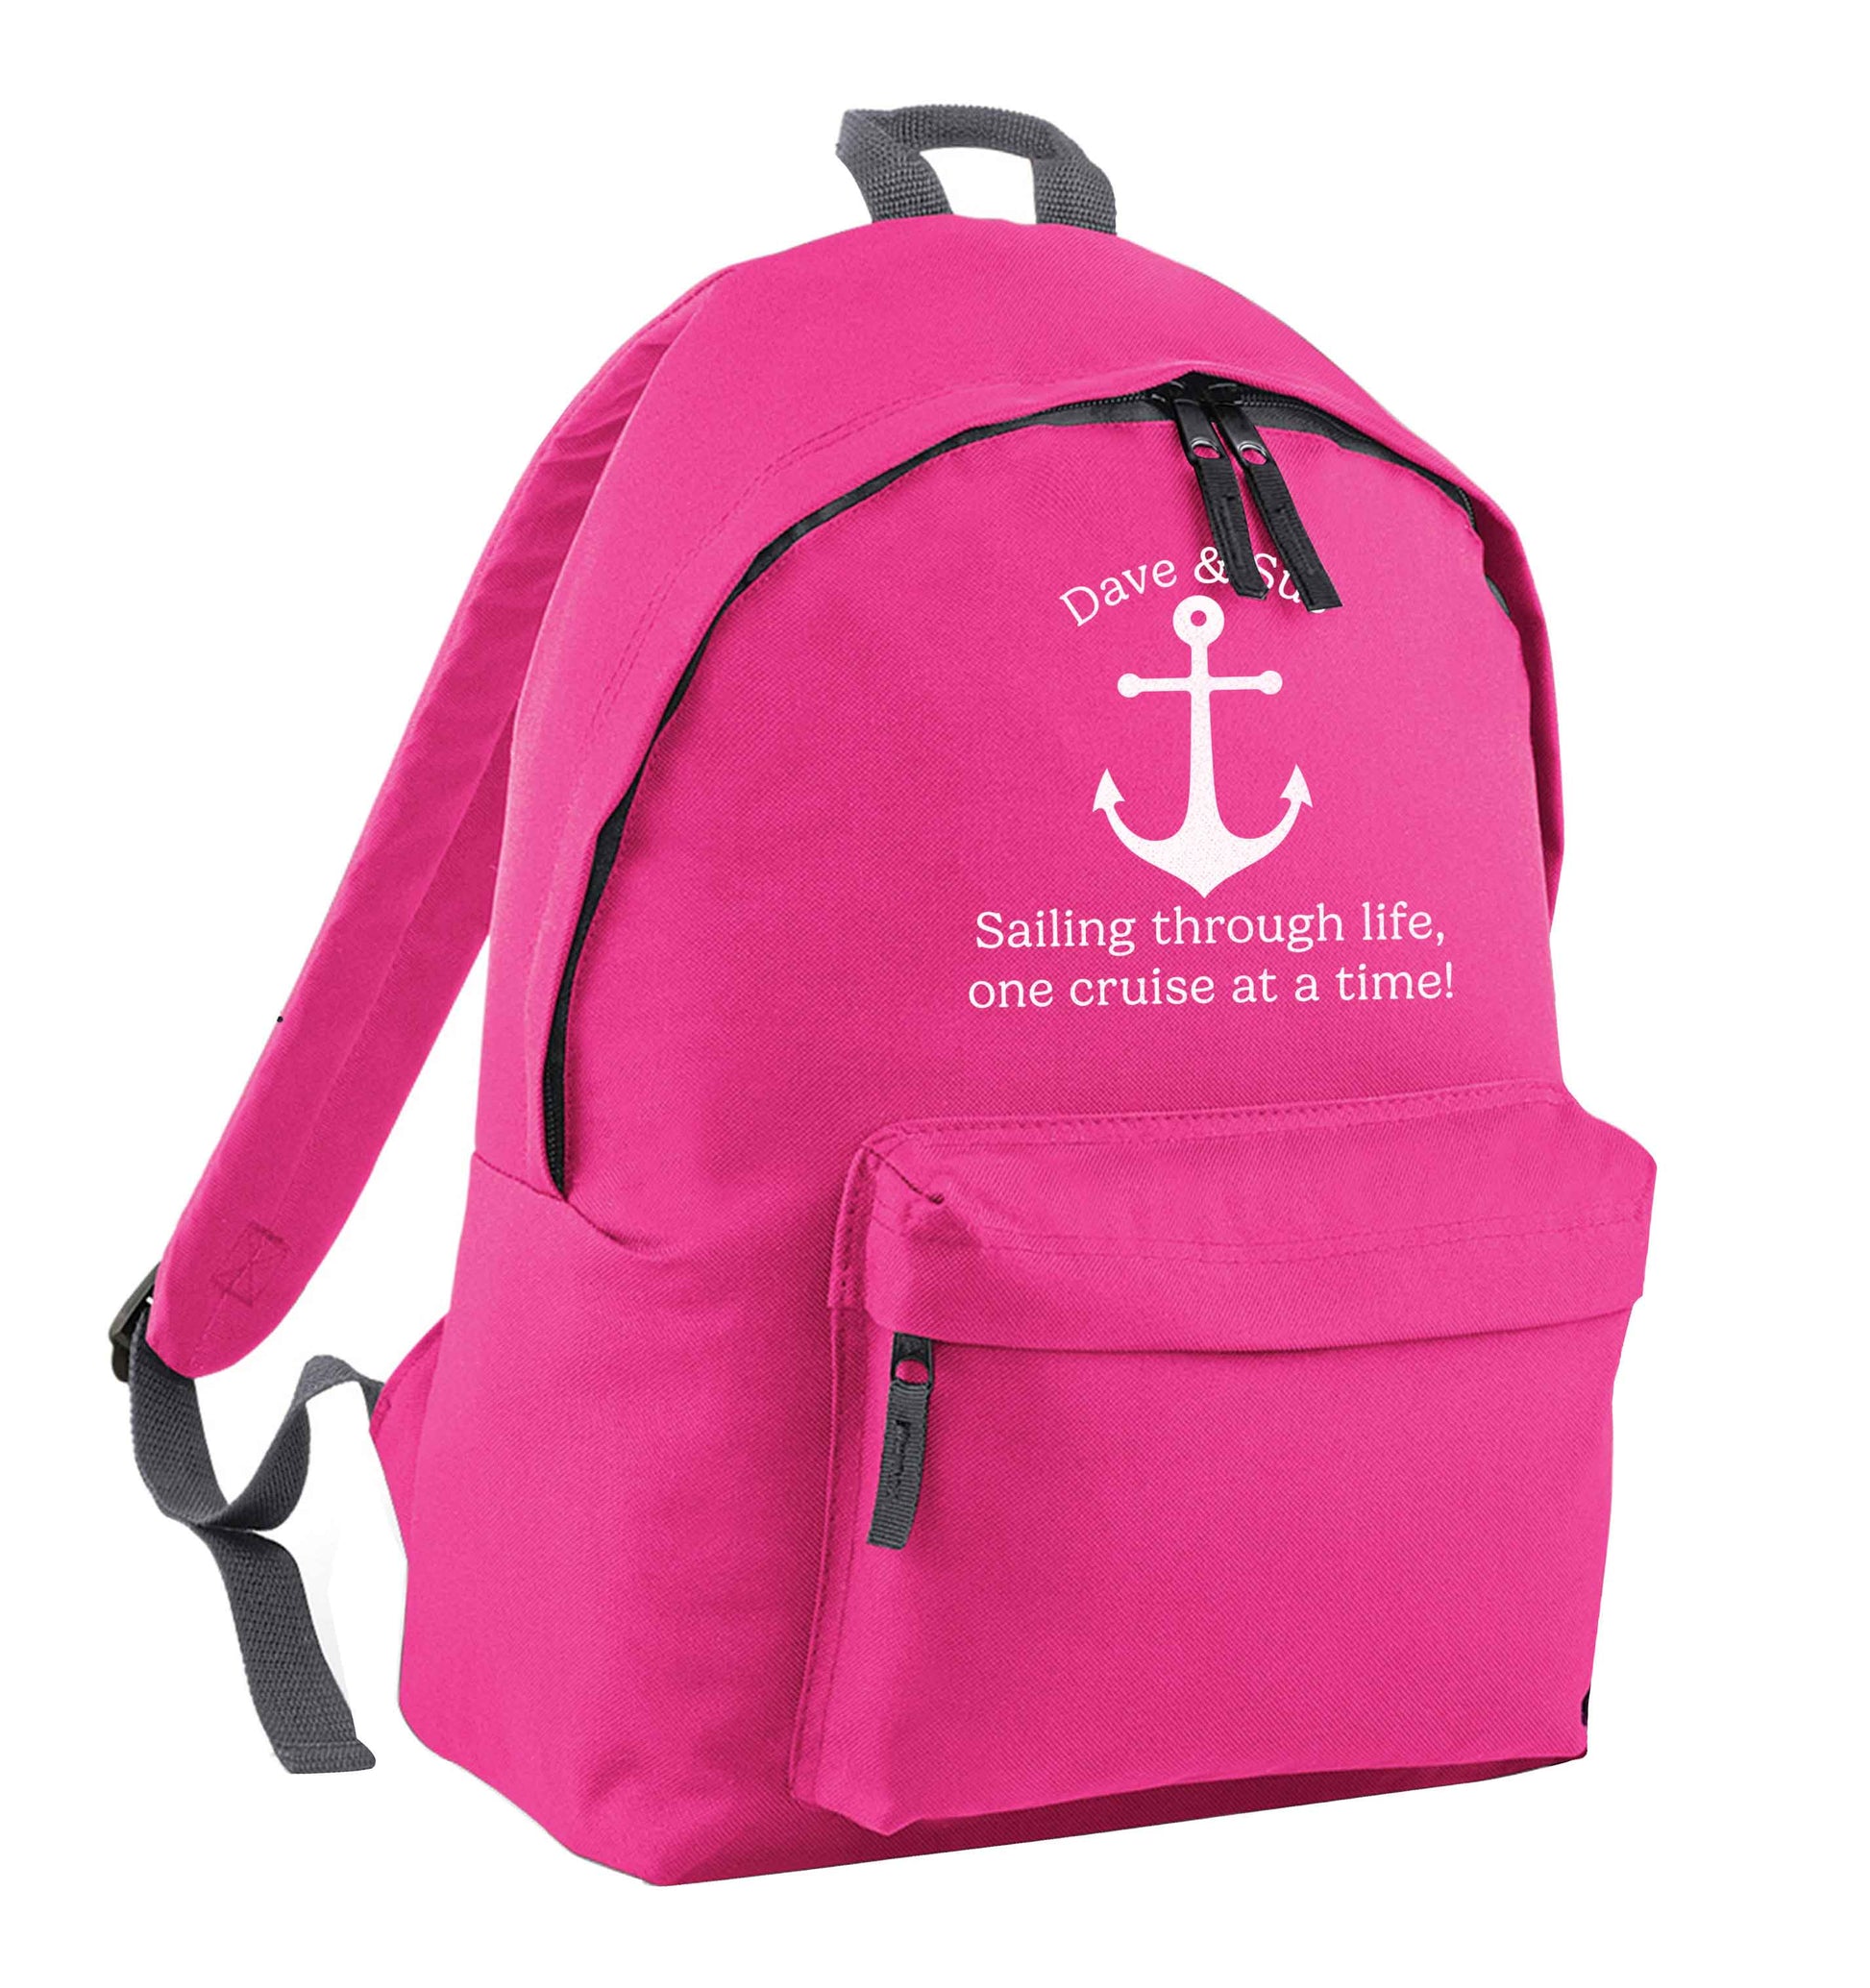 Sailing through life one cruise at a time - personalised pink adults backpack